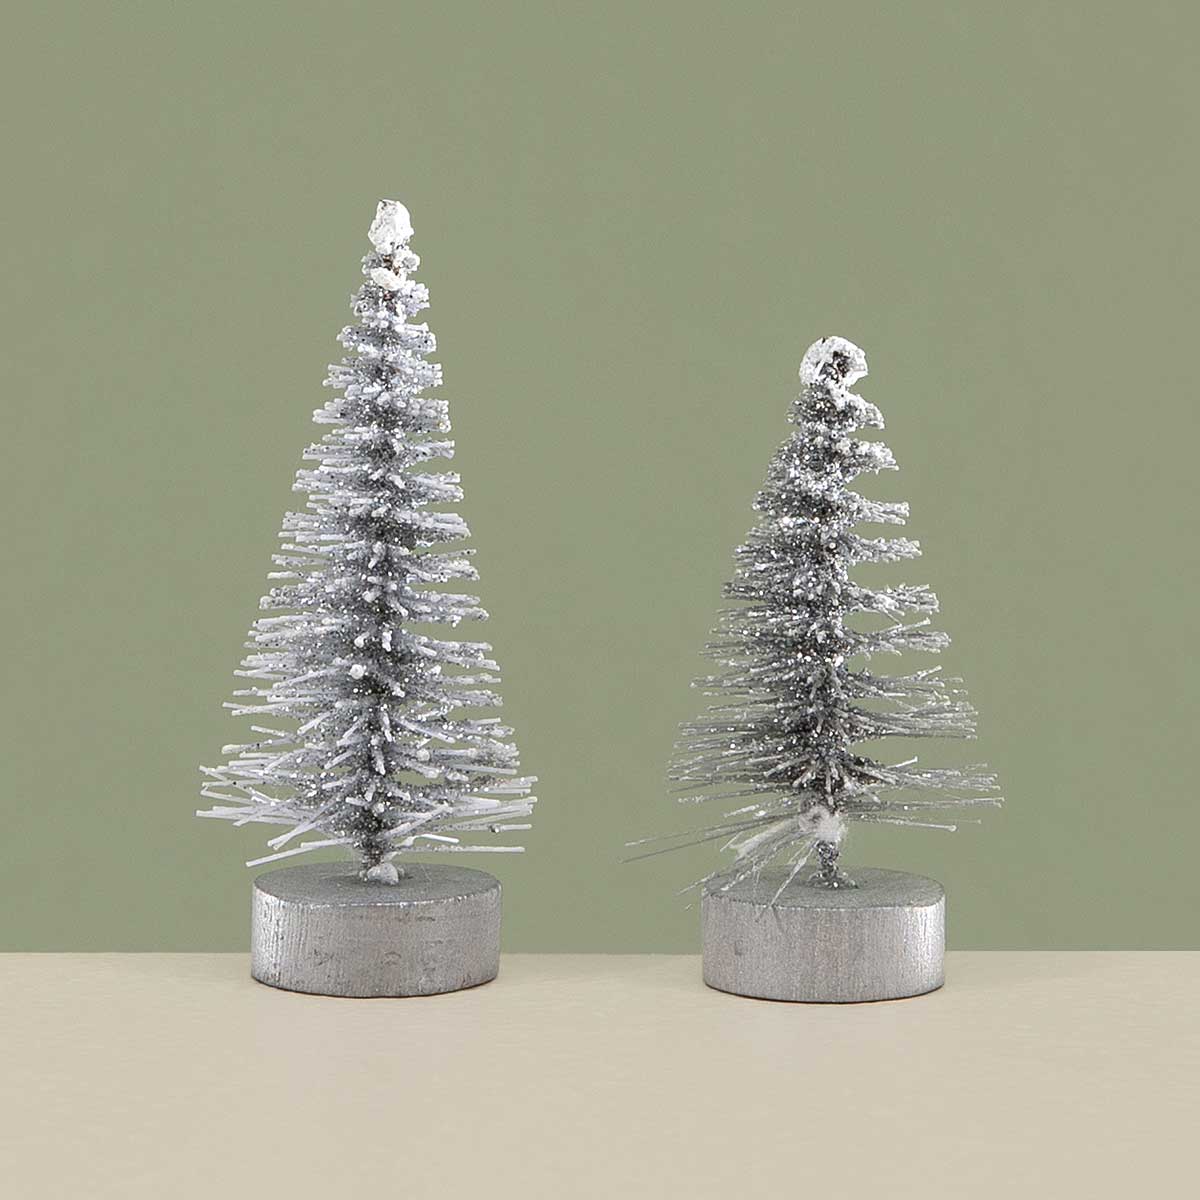 BRISTLE TREE SILVER 2 ASSORTED 1IN X 2IN/1IN X 2.5IN PVC/WOOD